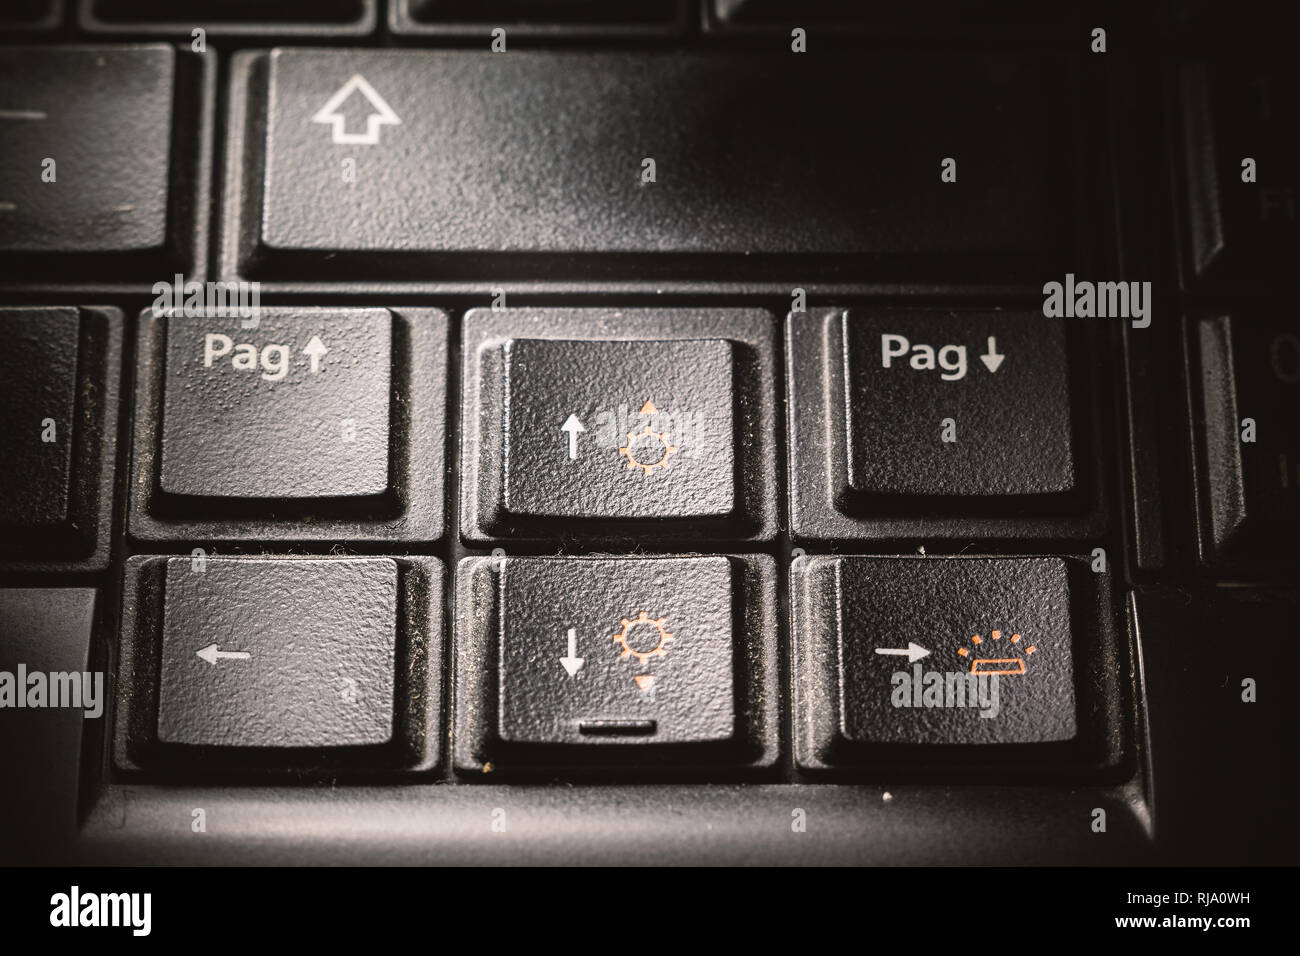 Computer Keyboard With LOUIS VUITTON Logo And Buy Text On The Keys.  Editorial 3D Rendering Stock Photo, Picture and Royalty Free Image. Image  120110645.